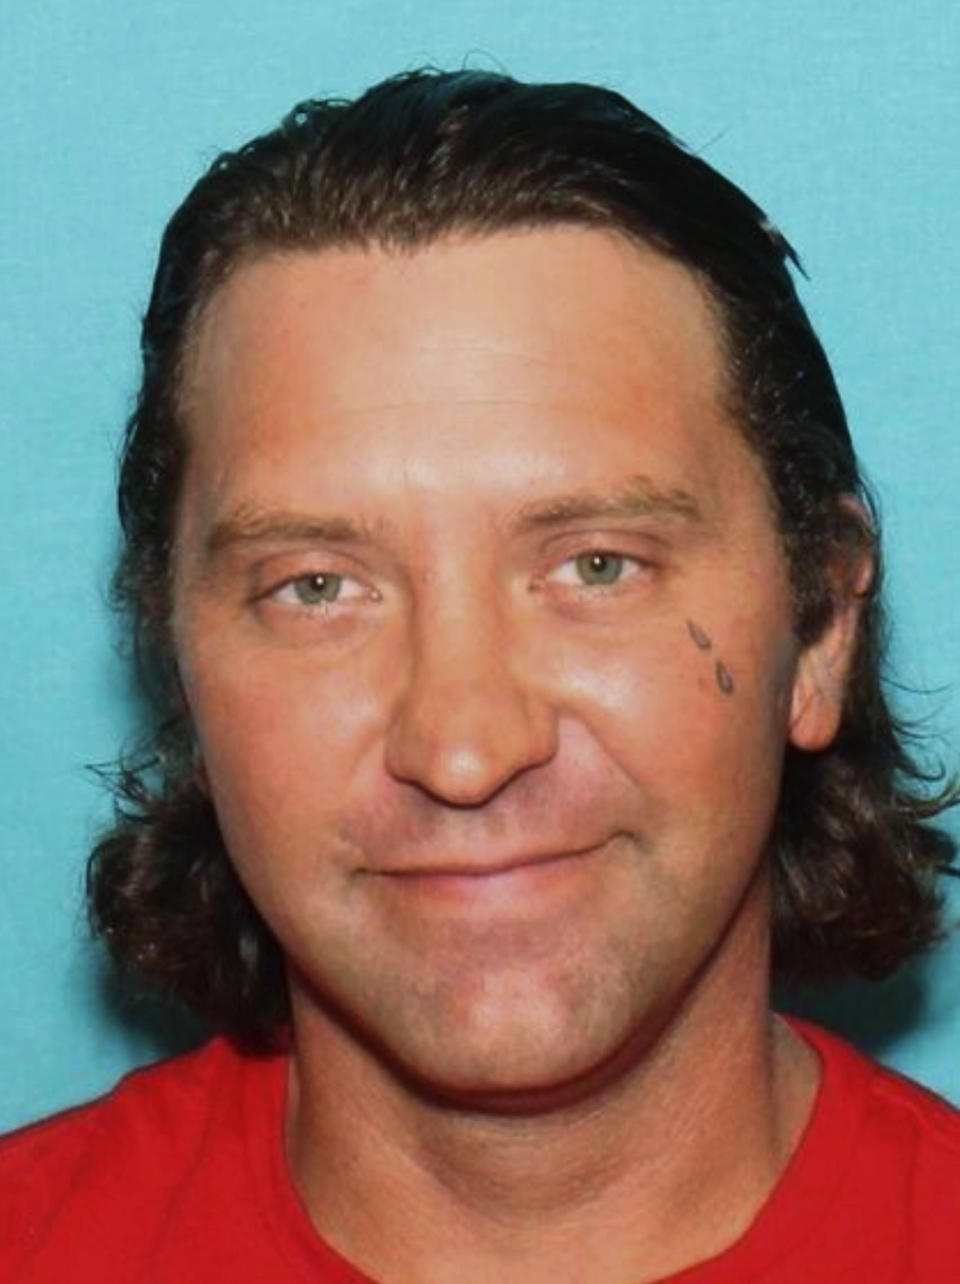 This undated photo provided by the City of Odessa via FBI shows Seth Aaron Ator. The gunman in a West Texas rampage "was on a long spiral of going down" and had been fired from his oil services job the morning he killed seven people, calling 911 both before and after the shooting began, authorities said Monday, Sept. 2, 2019. (City of Odessa/FBI via AP)